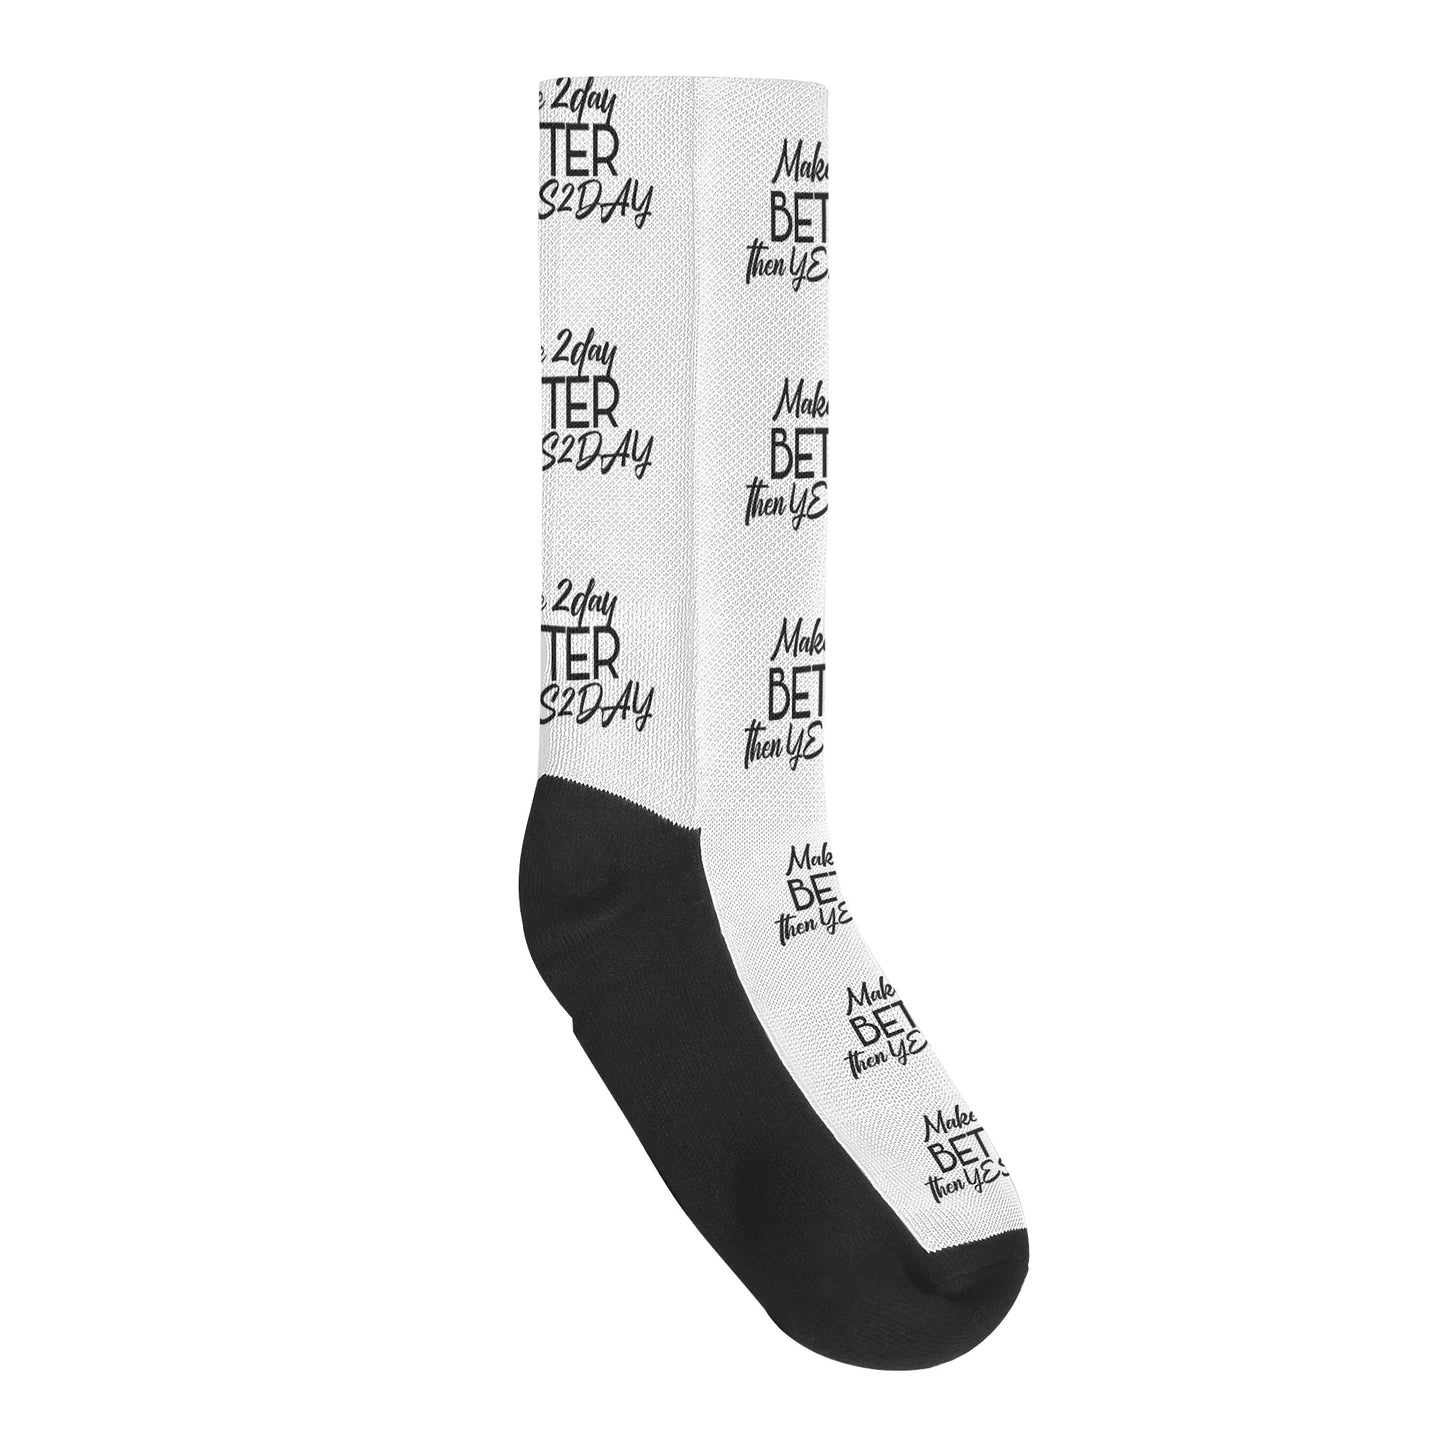 MAKE 2DAY BETTER THEN YES2DAY Socks